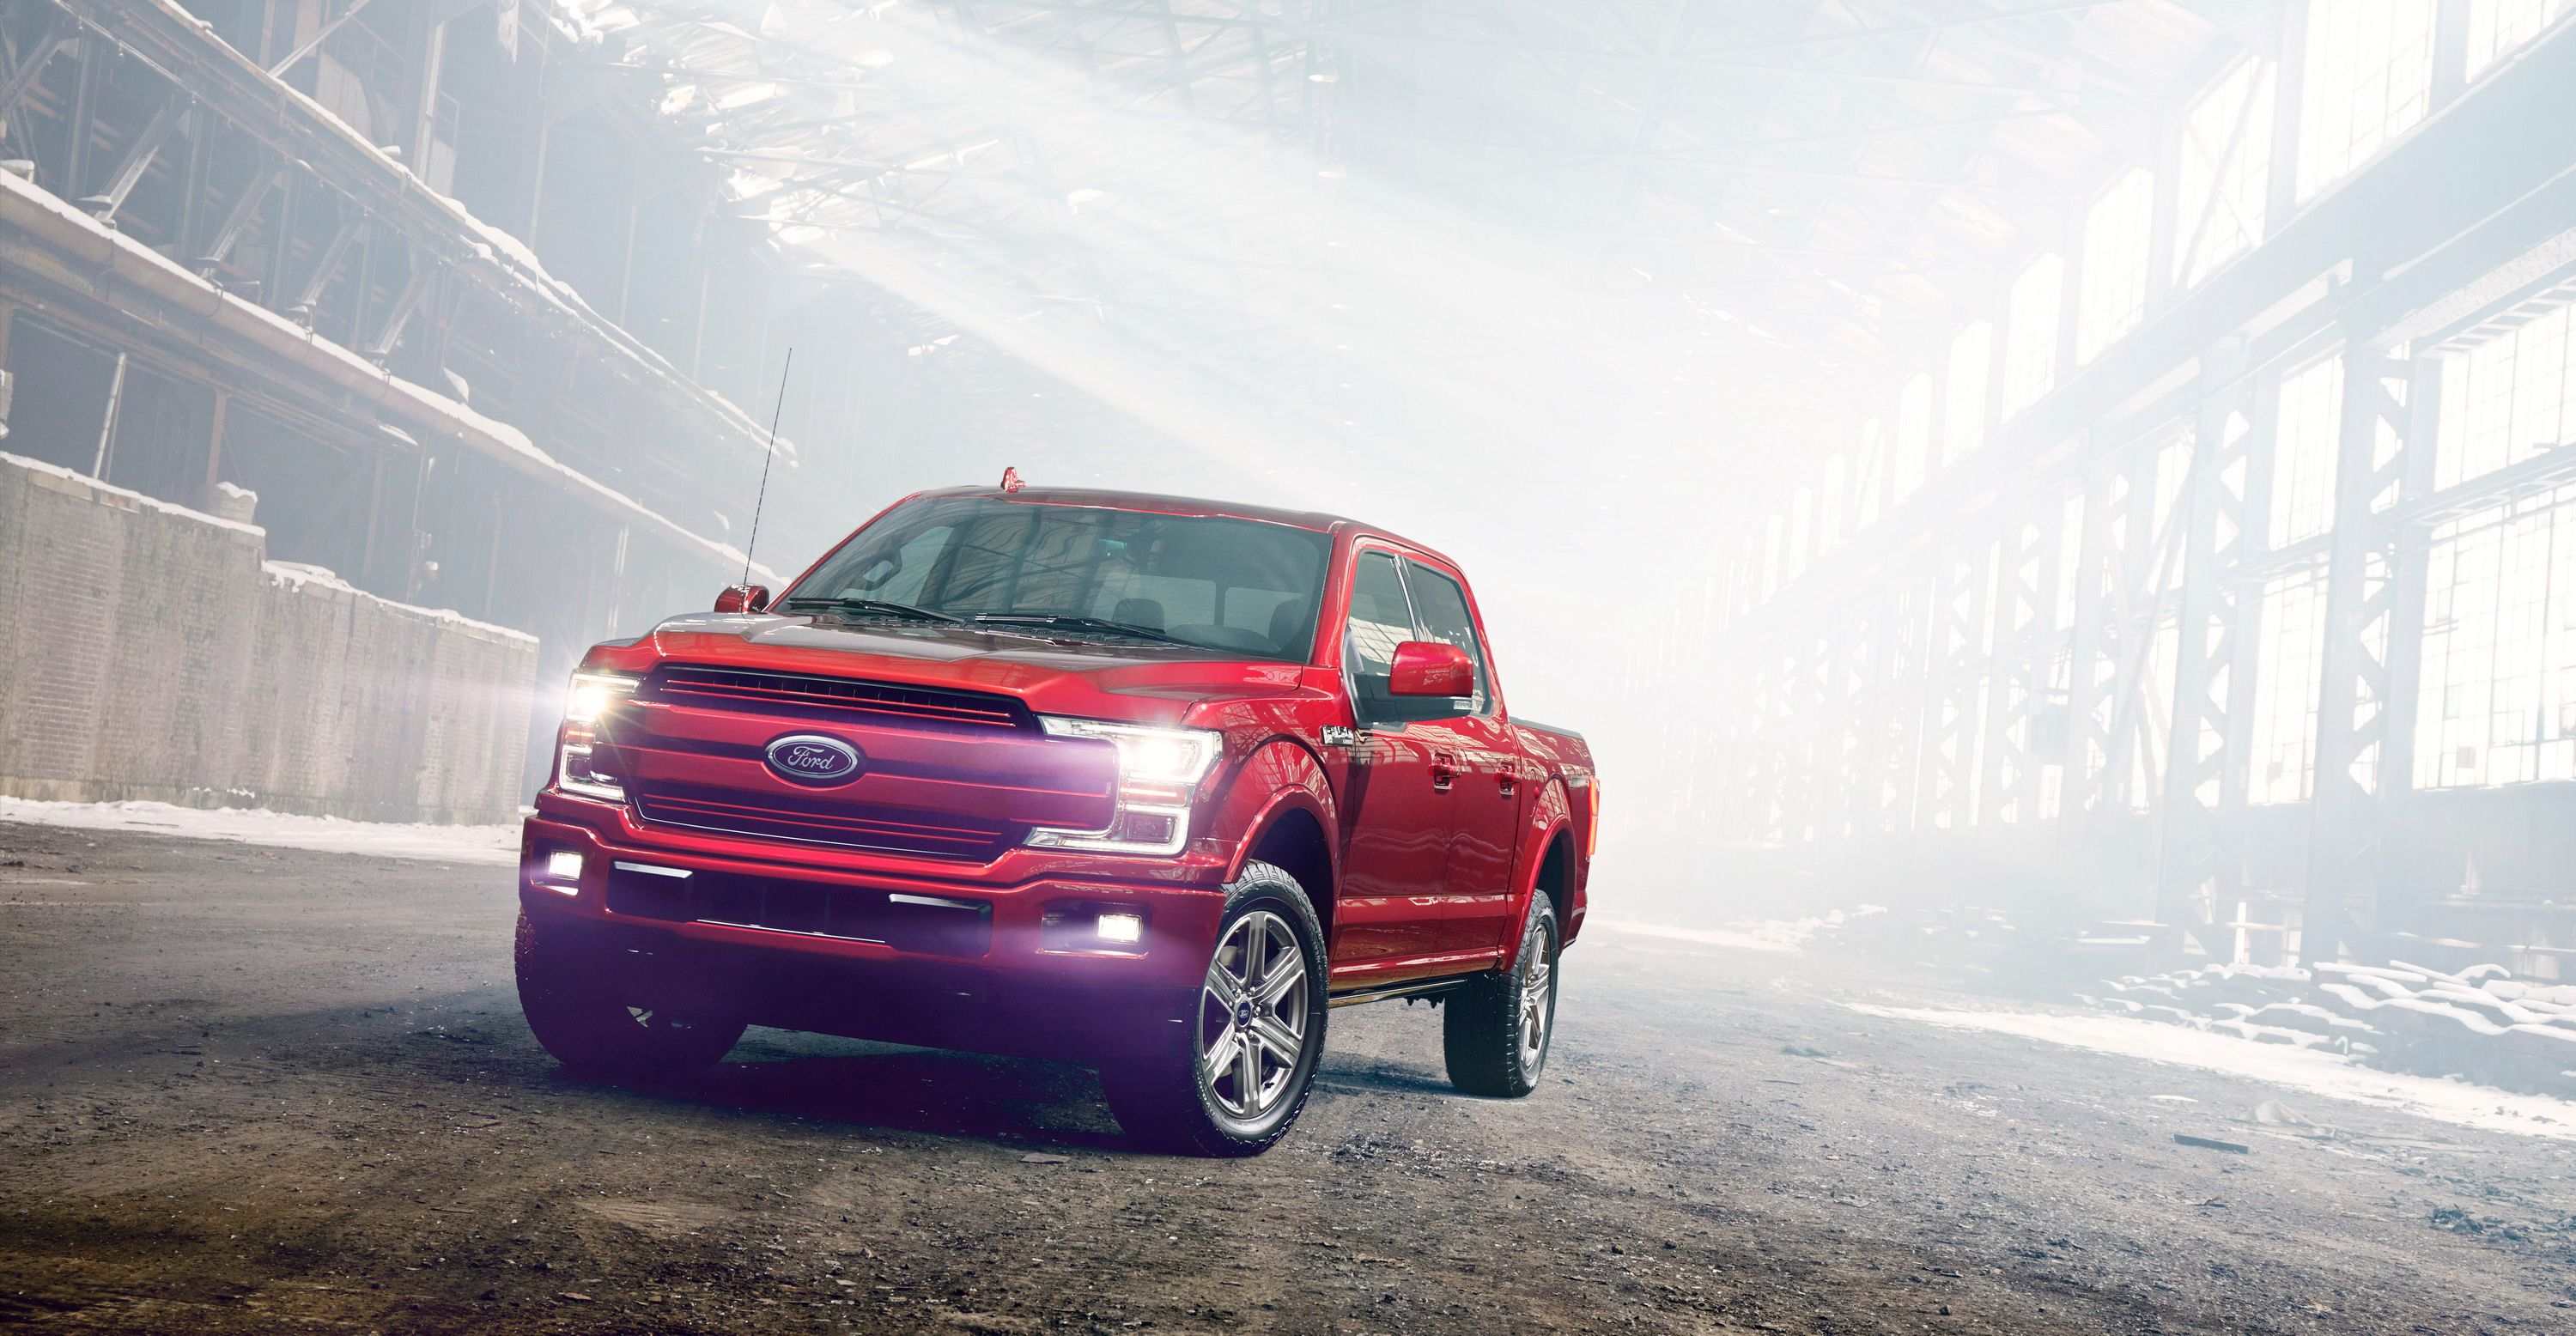 2017 F-150 Goes Diesel with its 2018 Facelift!